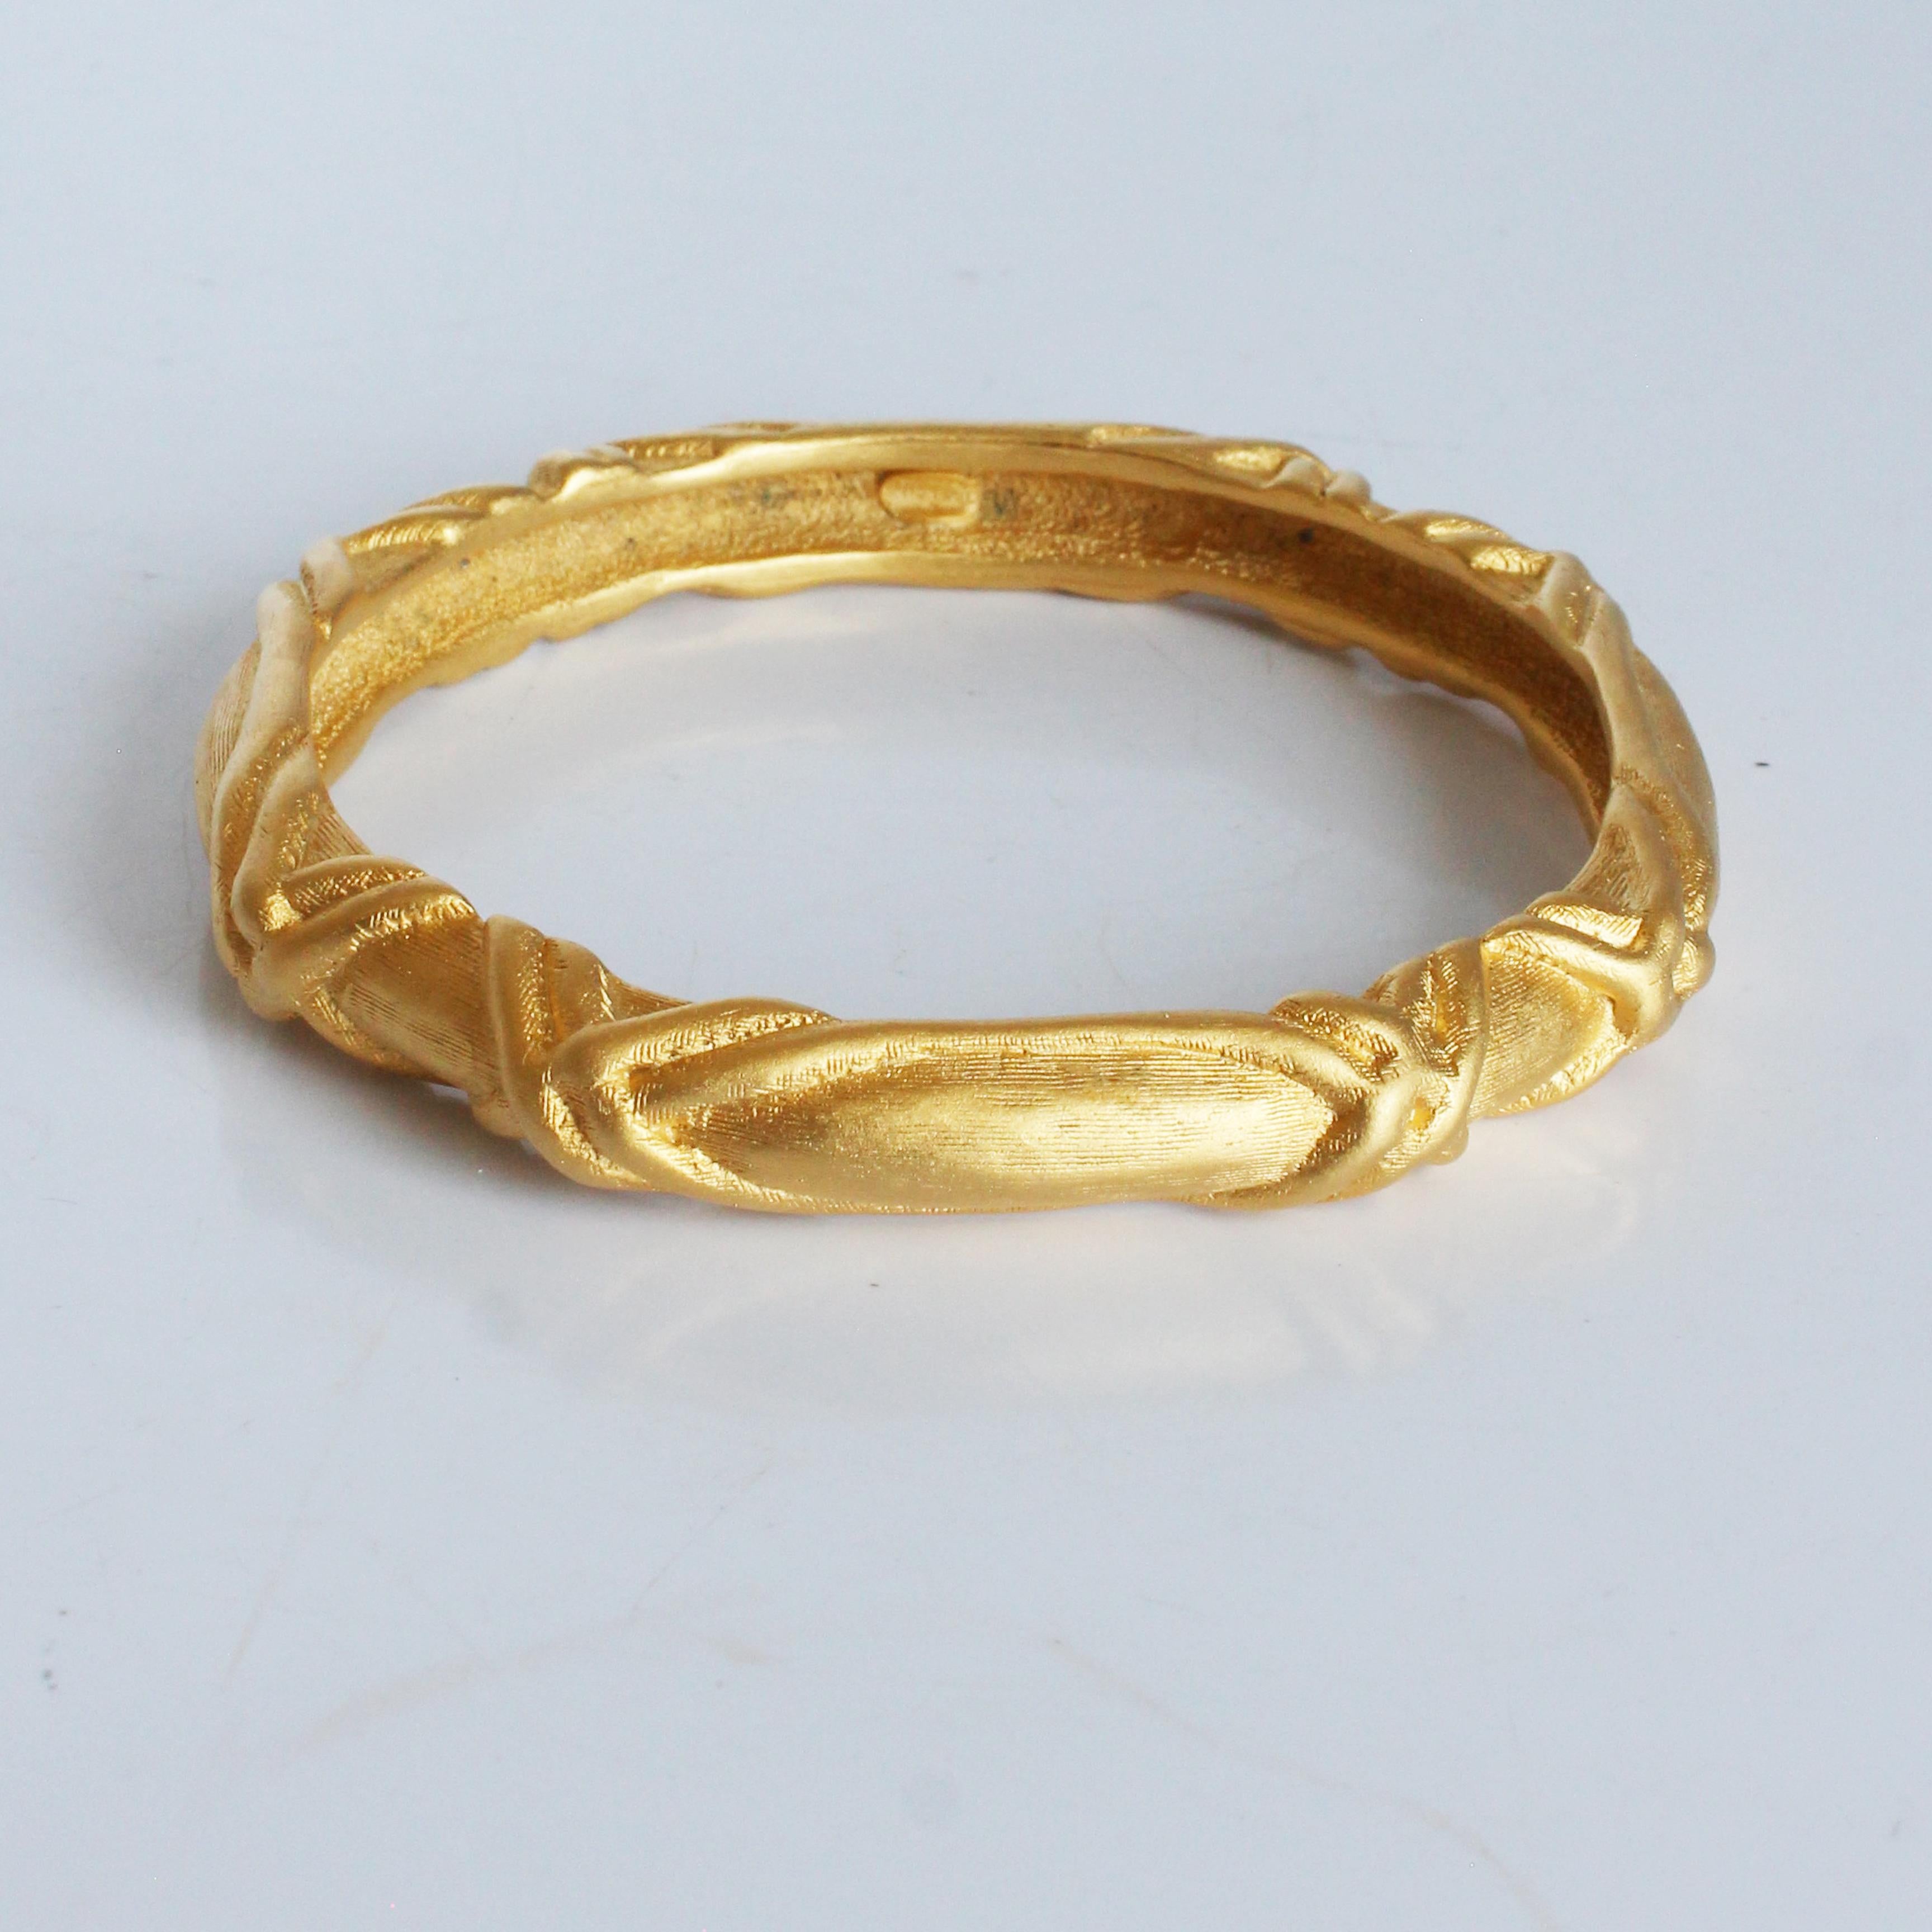 Women's Givenchy Bracelet Bangle Gold Metal Textured Abstract Vintage 80s Jewelry  For Sale